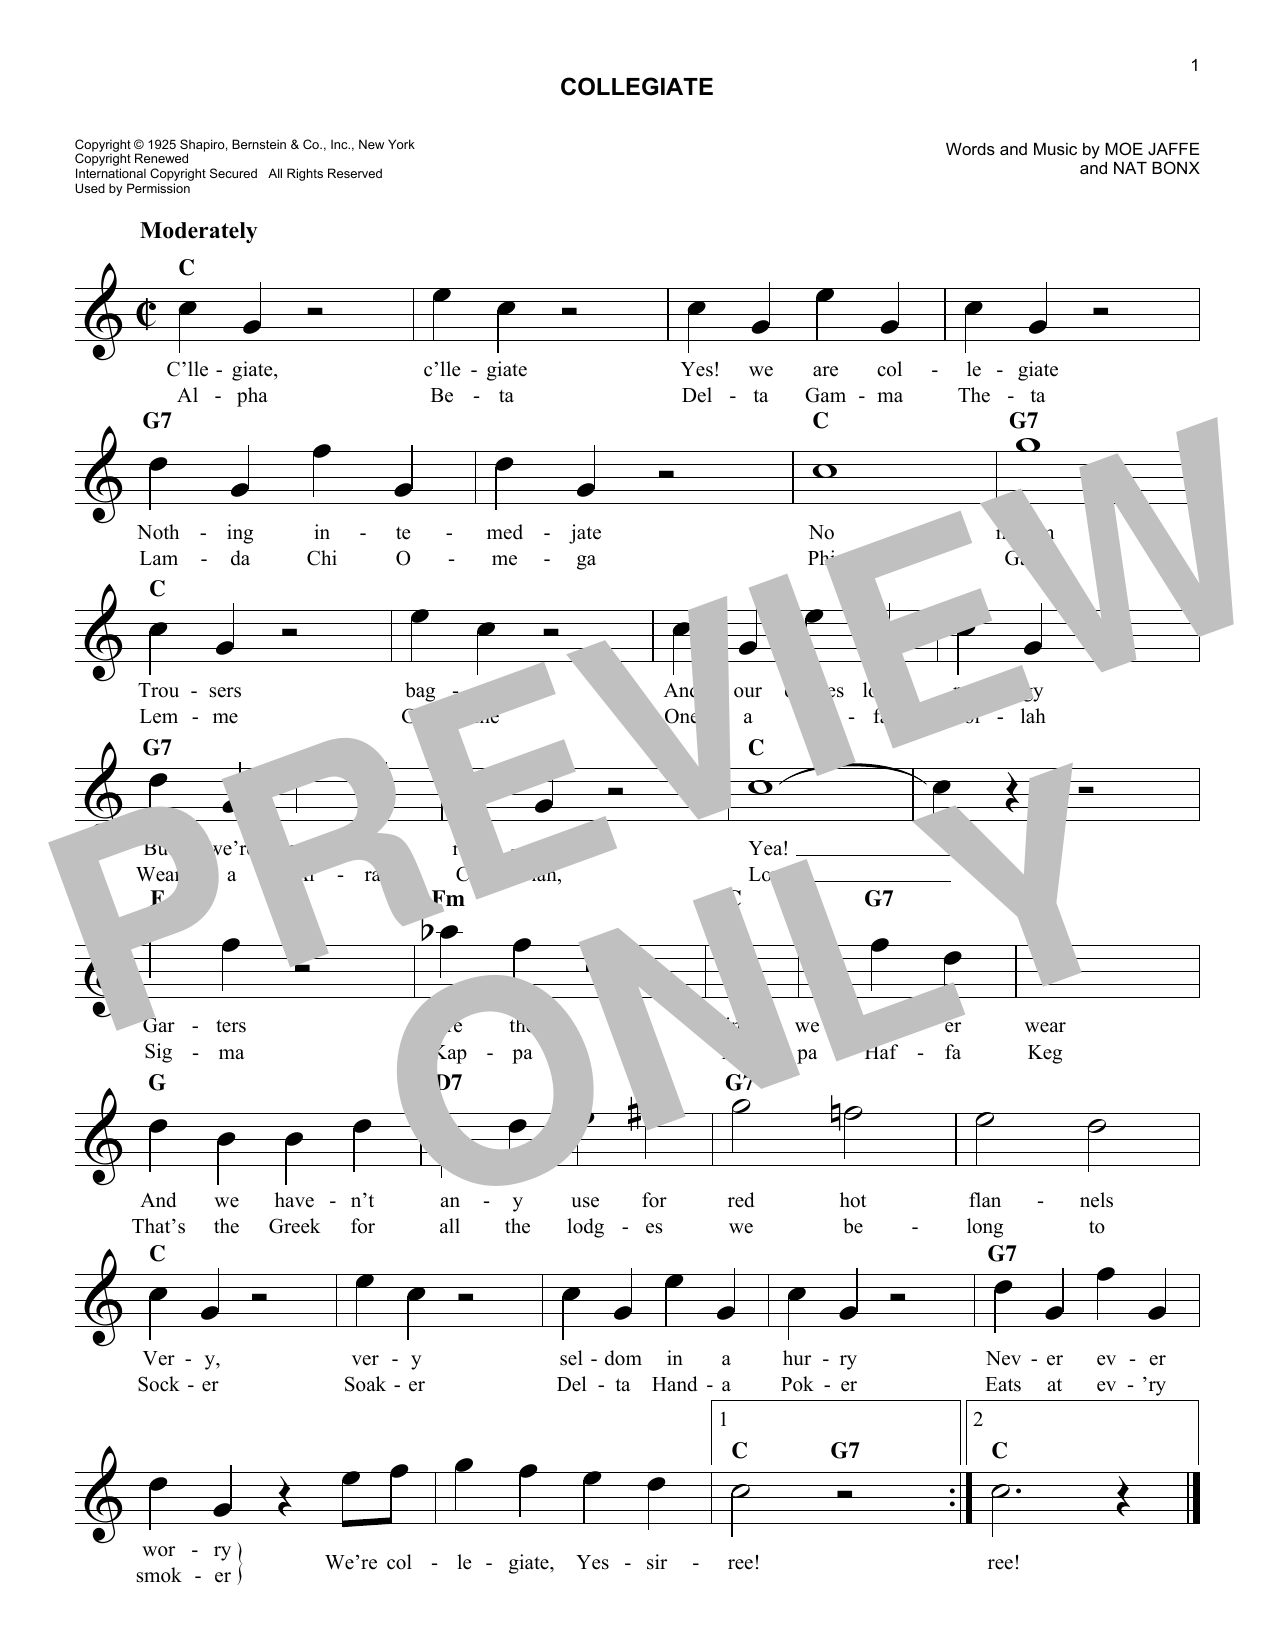 Download Fred Waring's Pennsylvanians Collegiate Sheet Music